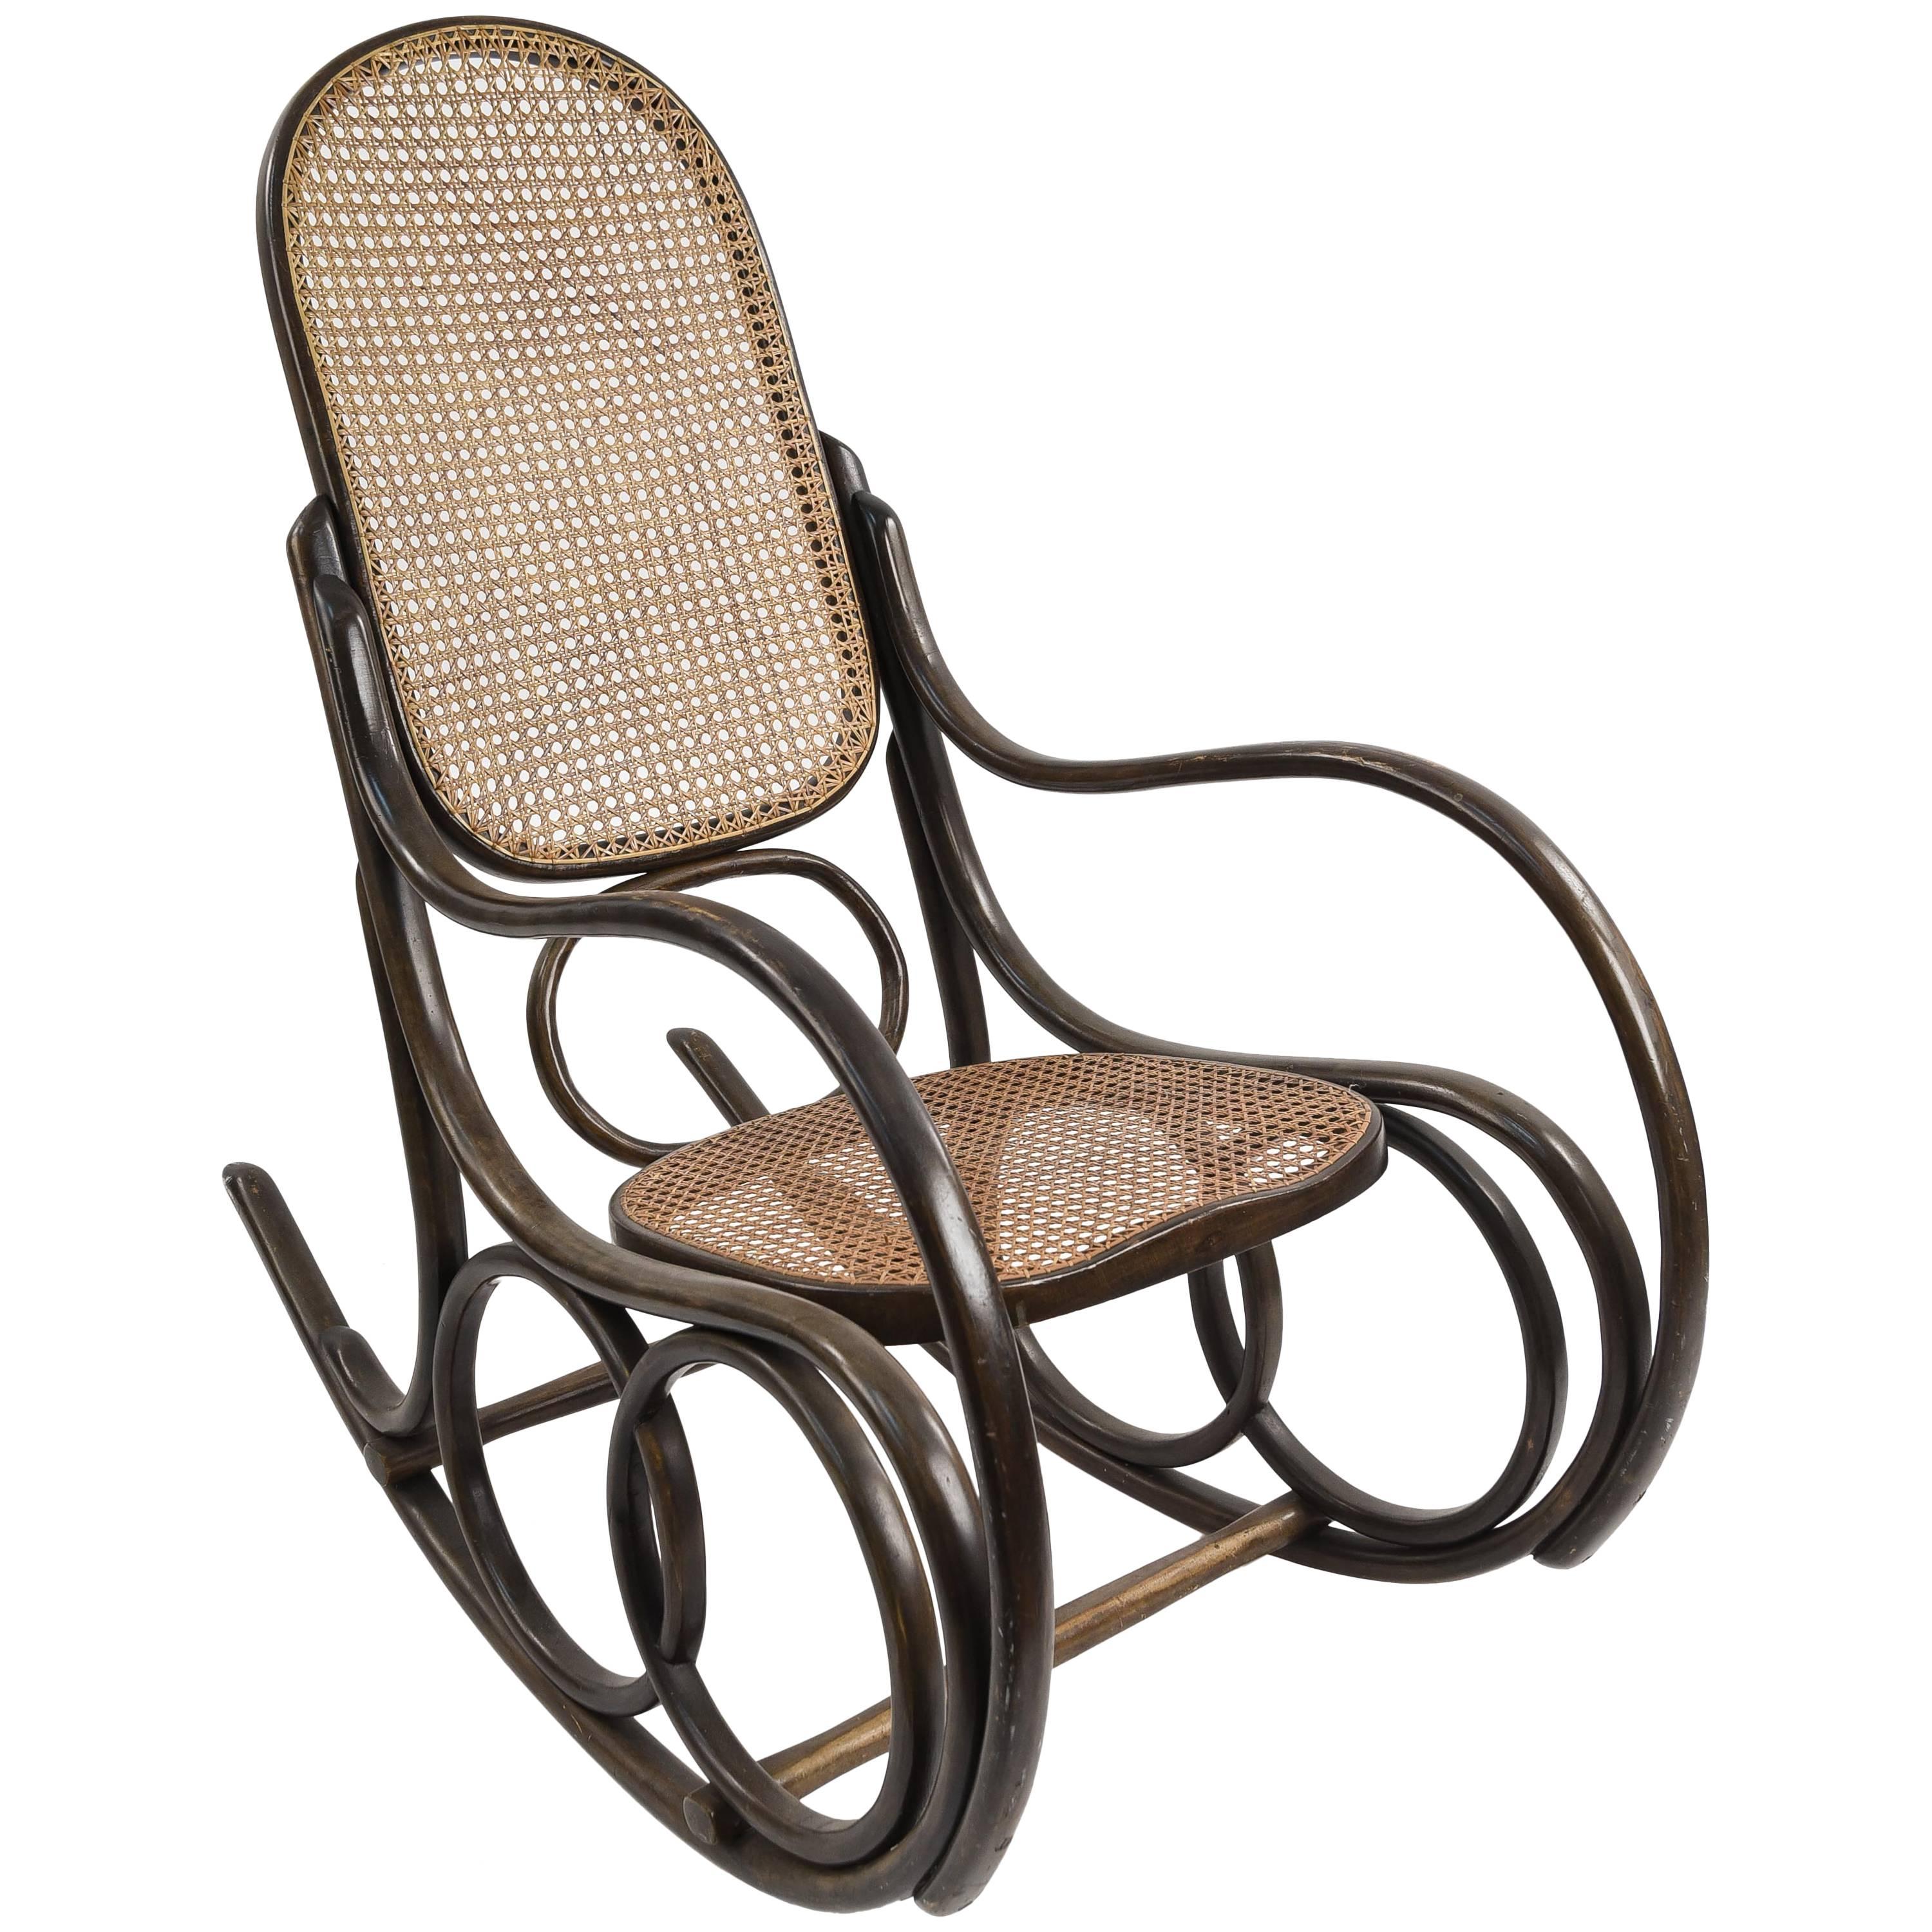 Thonet Rocking Chair in Bentwood and Cane